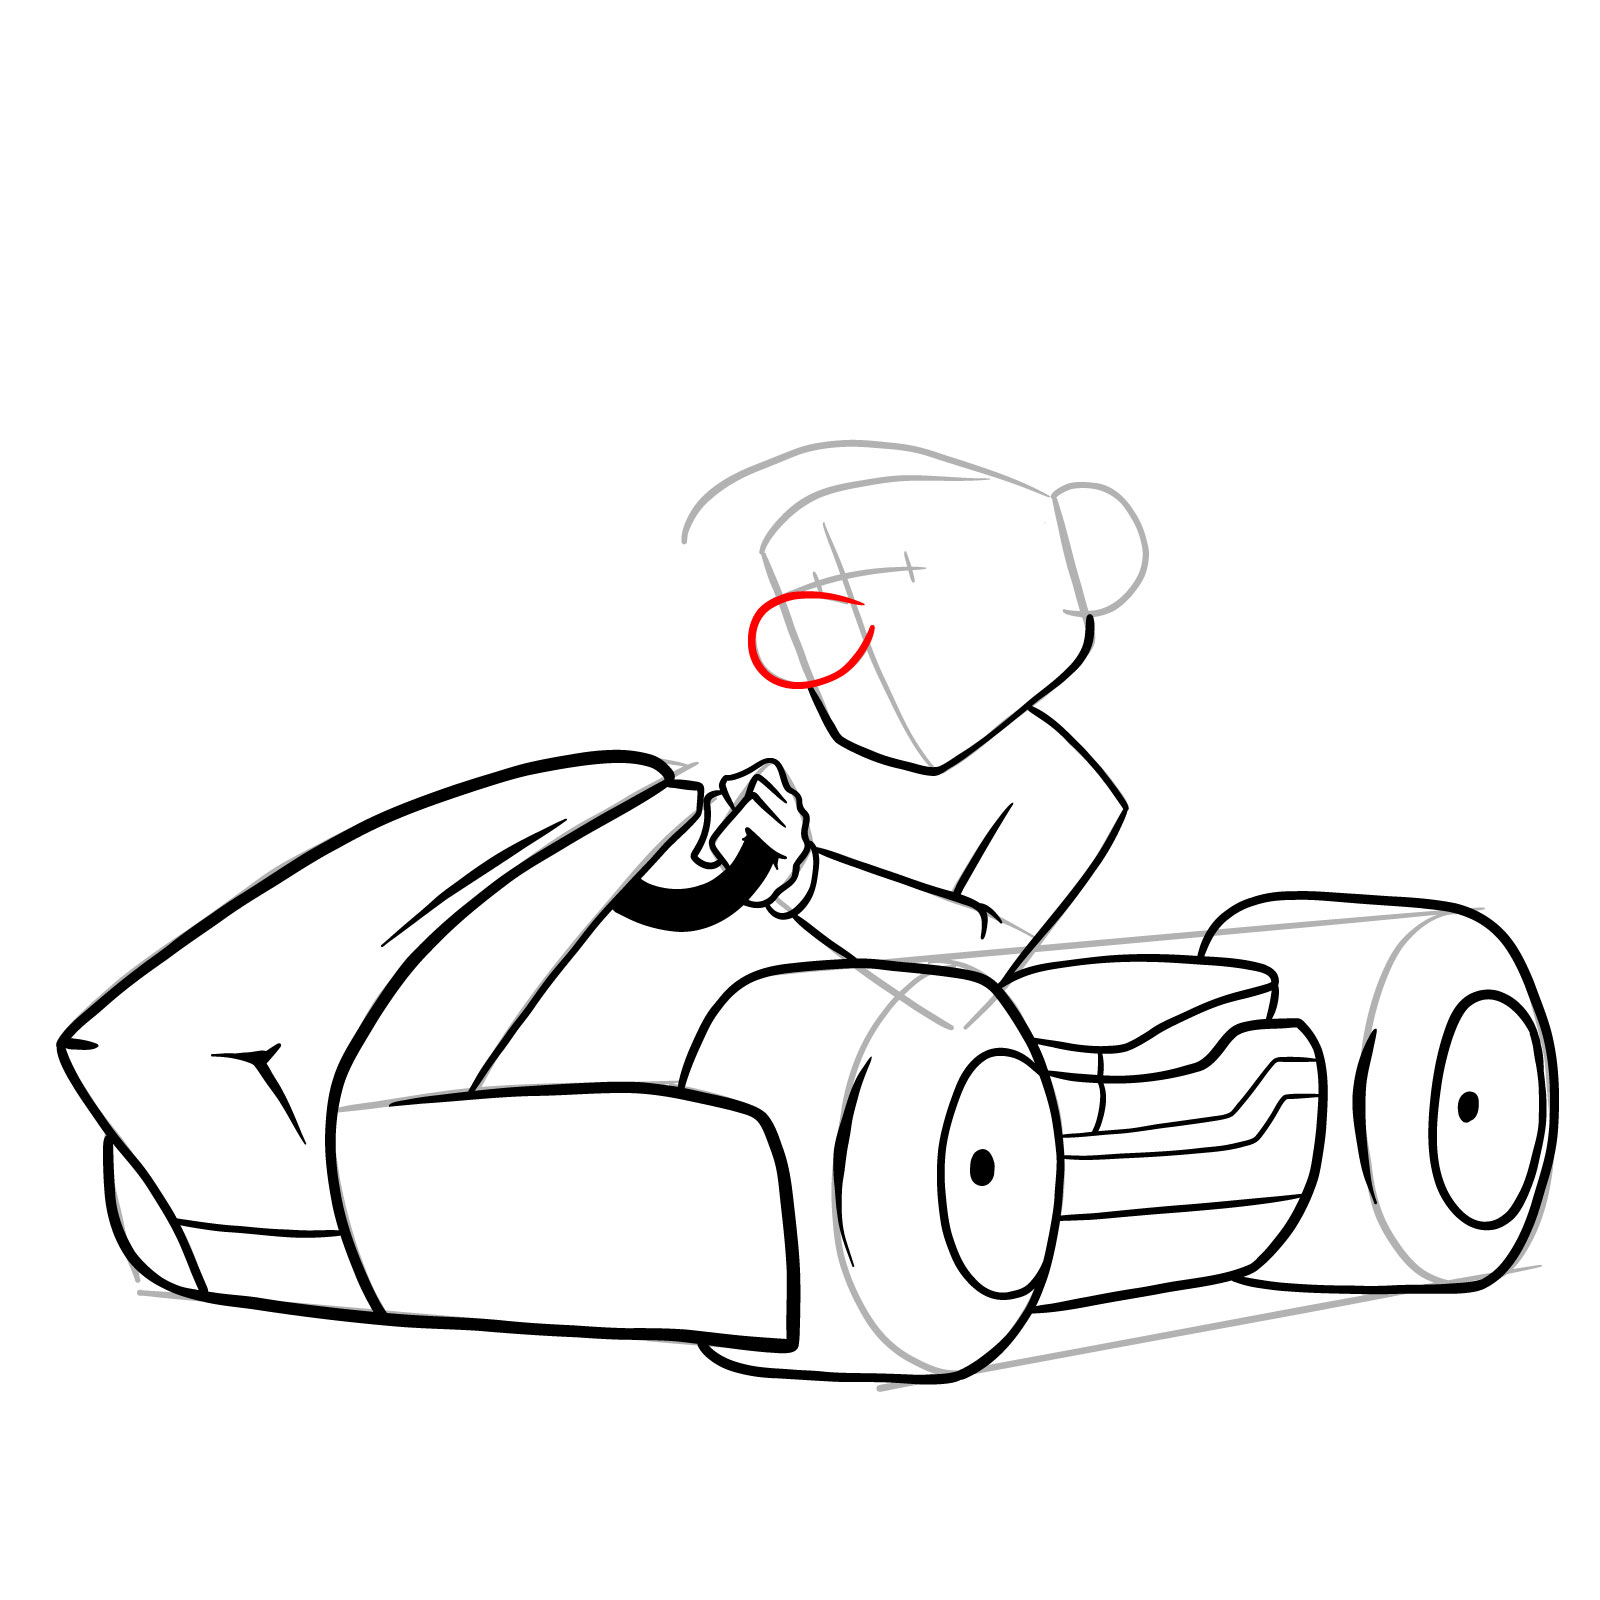 How to draw Race Traitors Mario - step 21